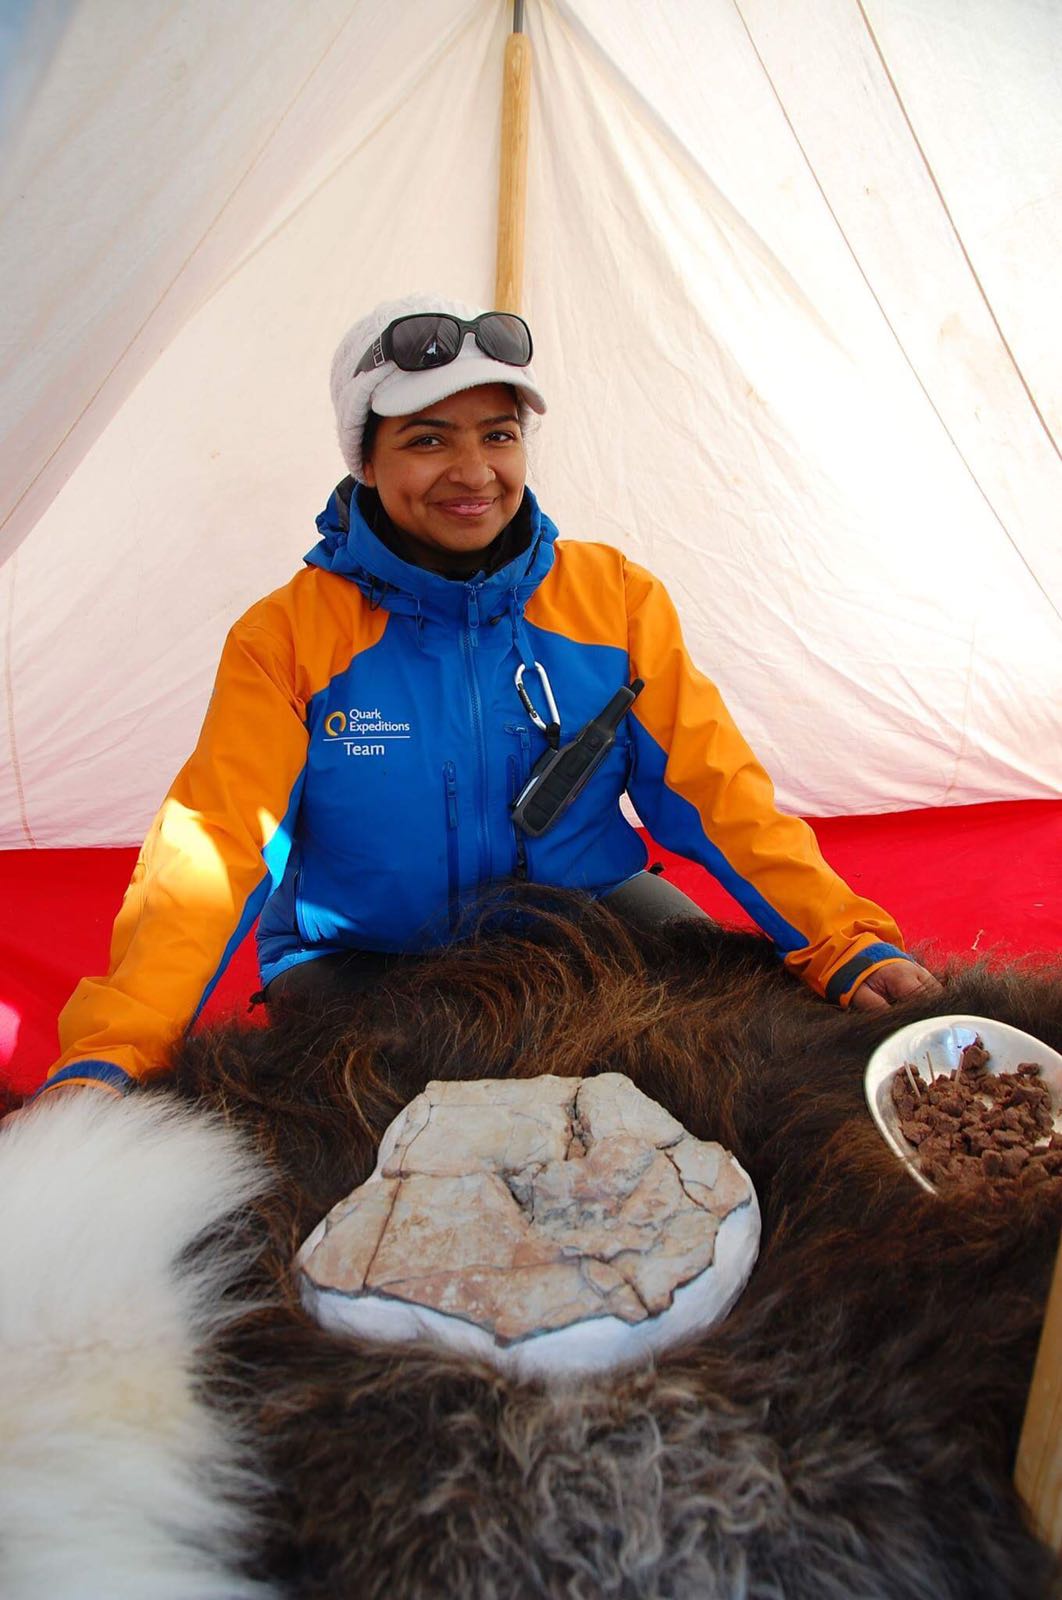 Spend more time exploring Greenland&apos;s history and culture on small ship expeditions.